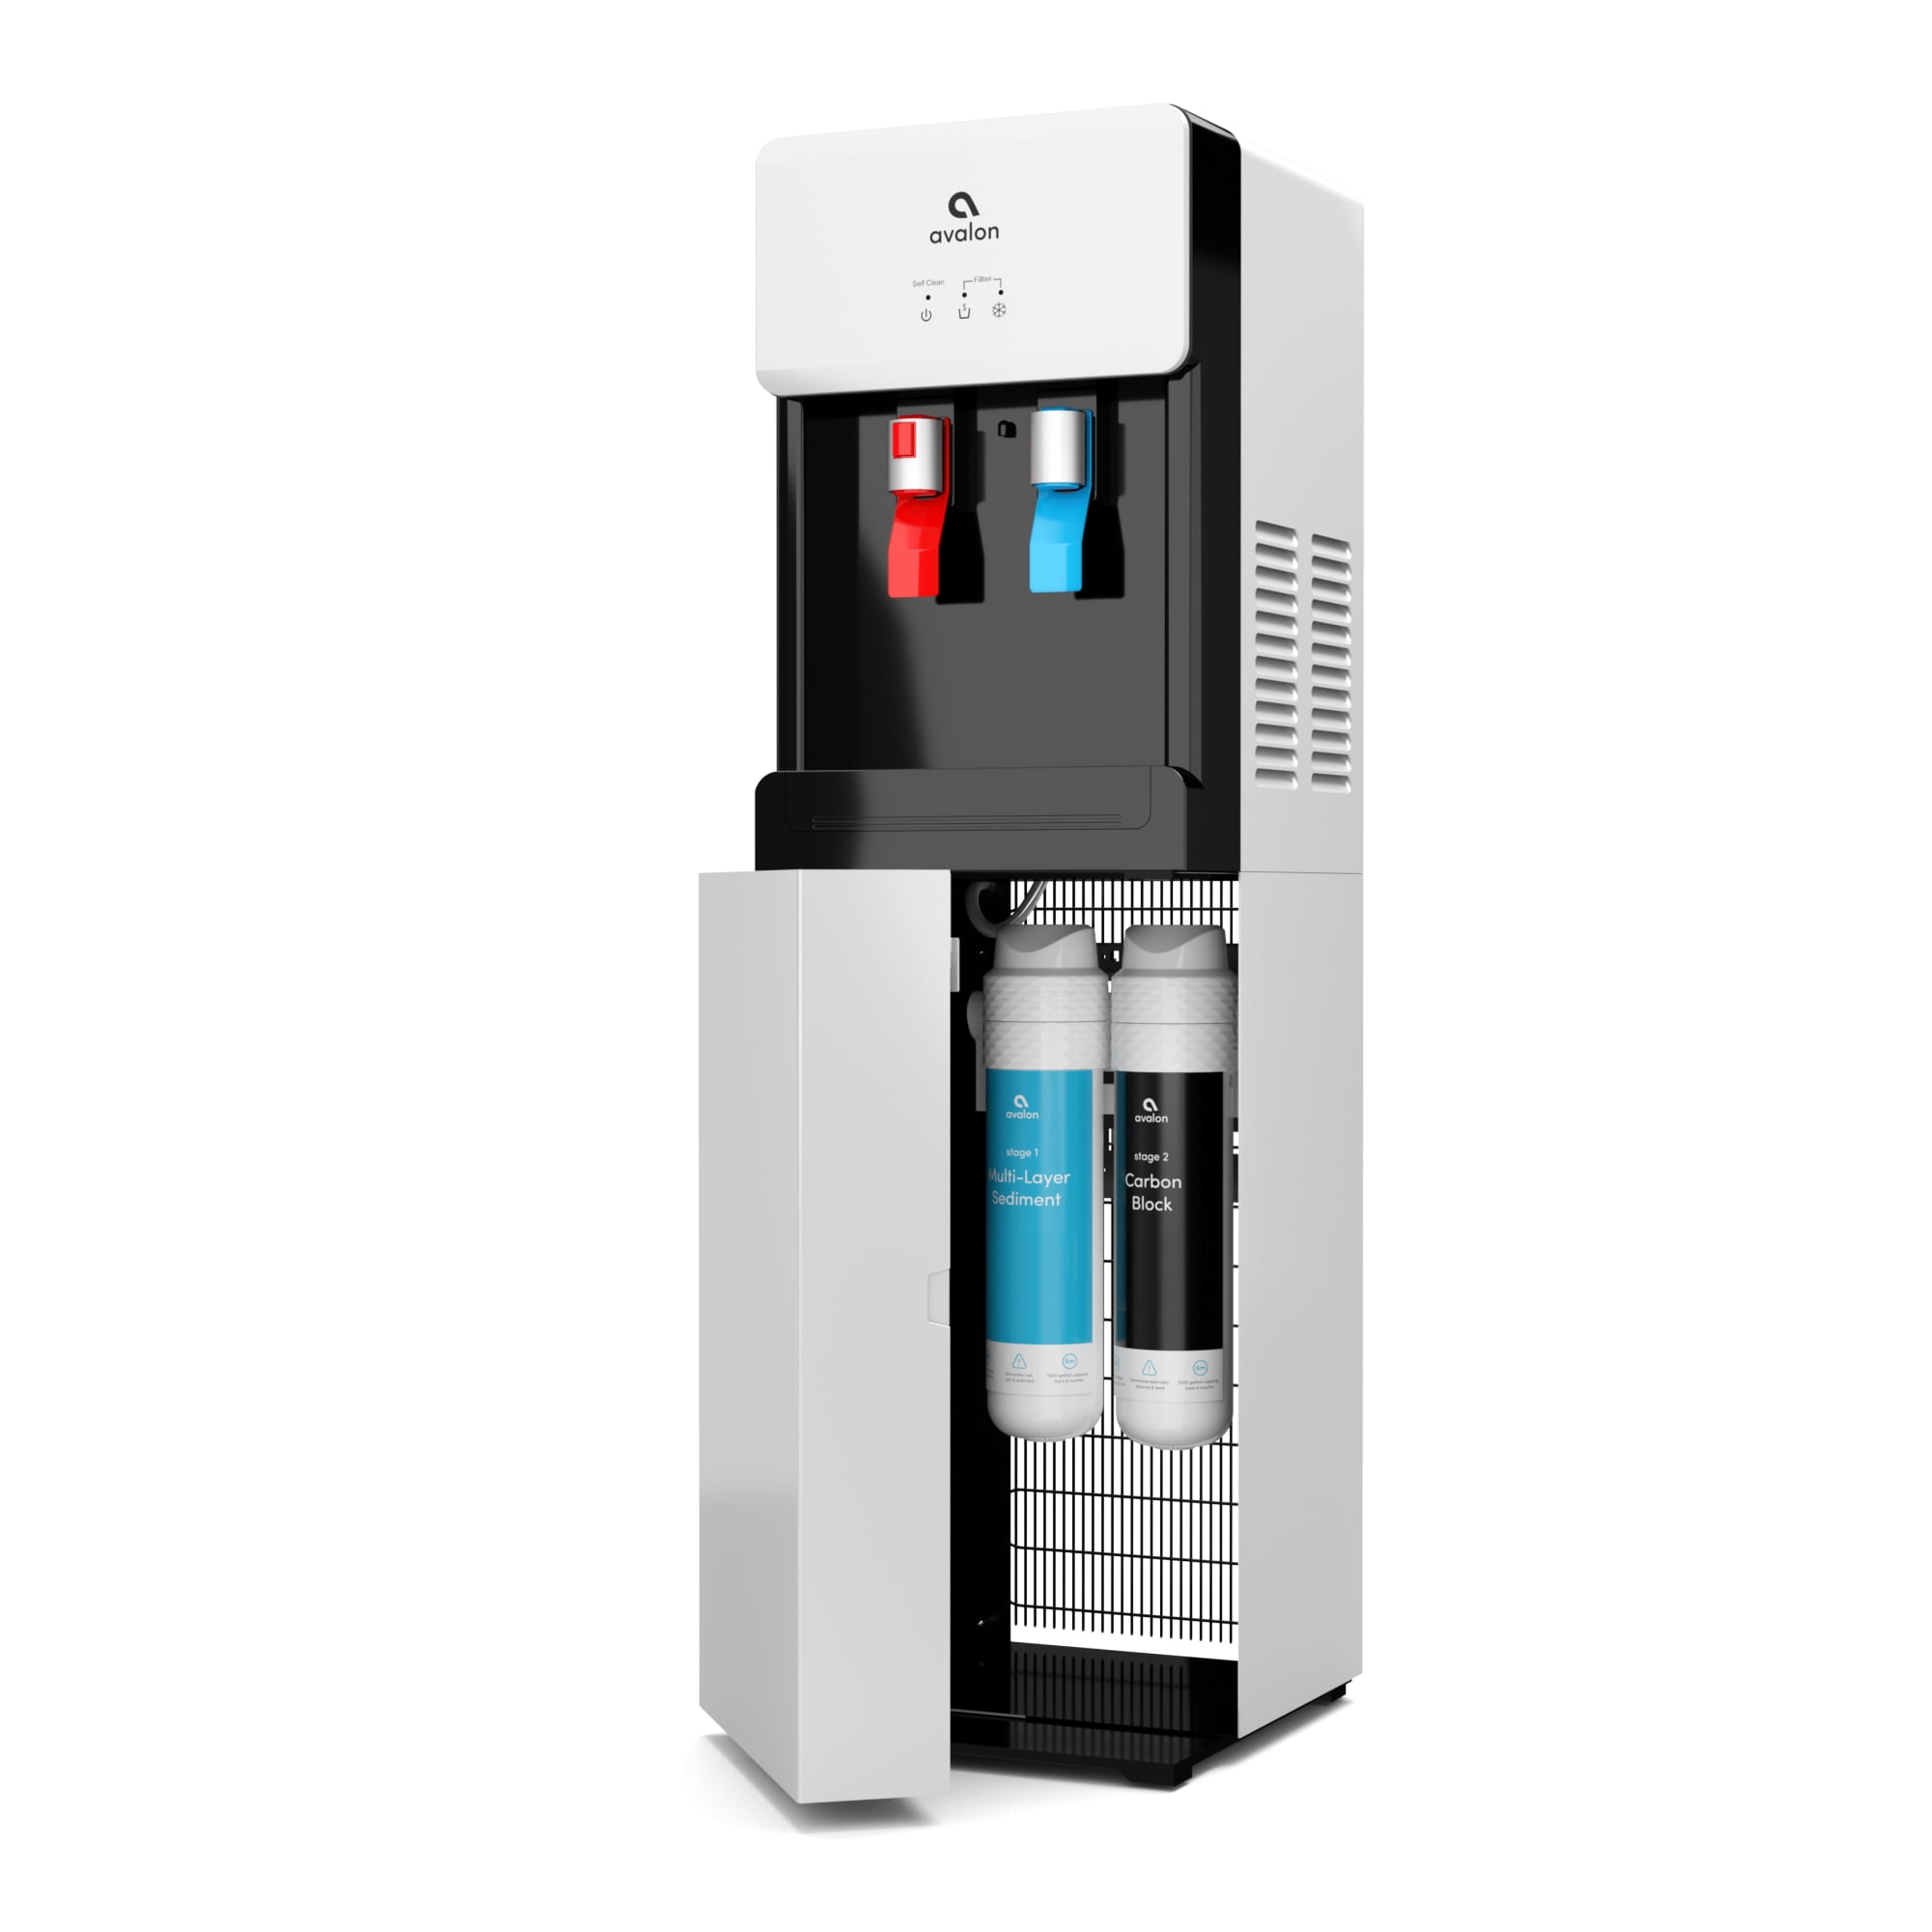 avalon self cleaning water dispenser